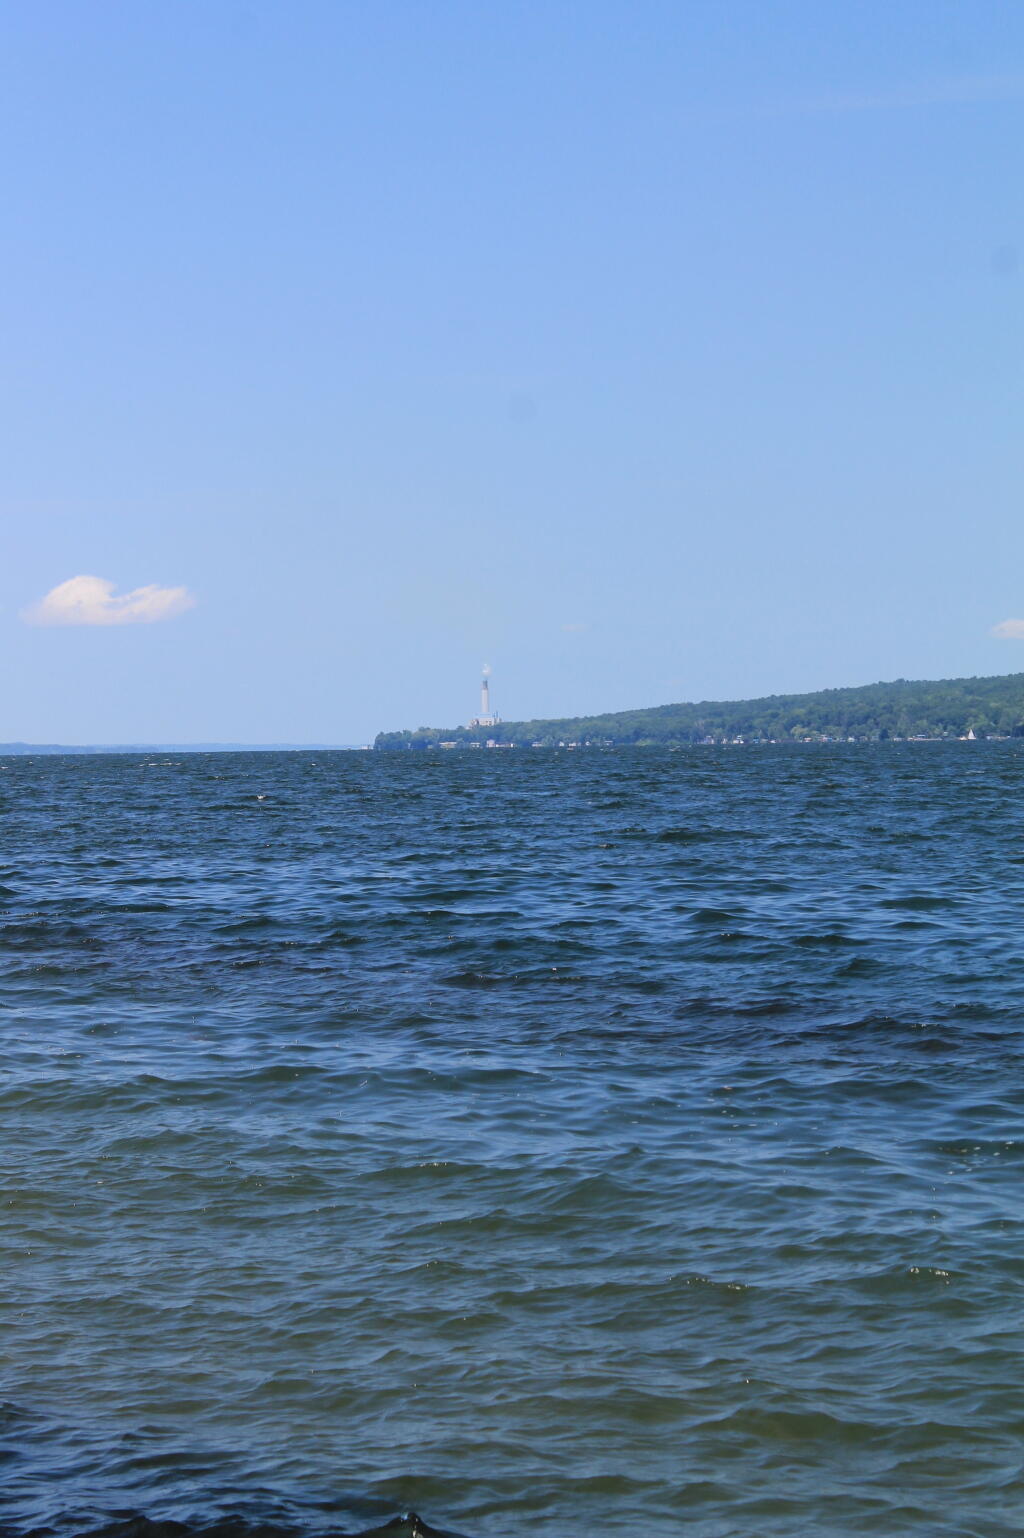 AES Cayuga Coal Power Plant in Distance